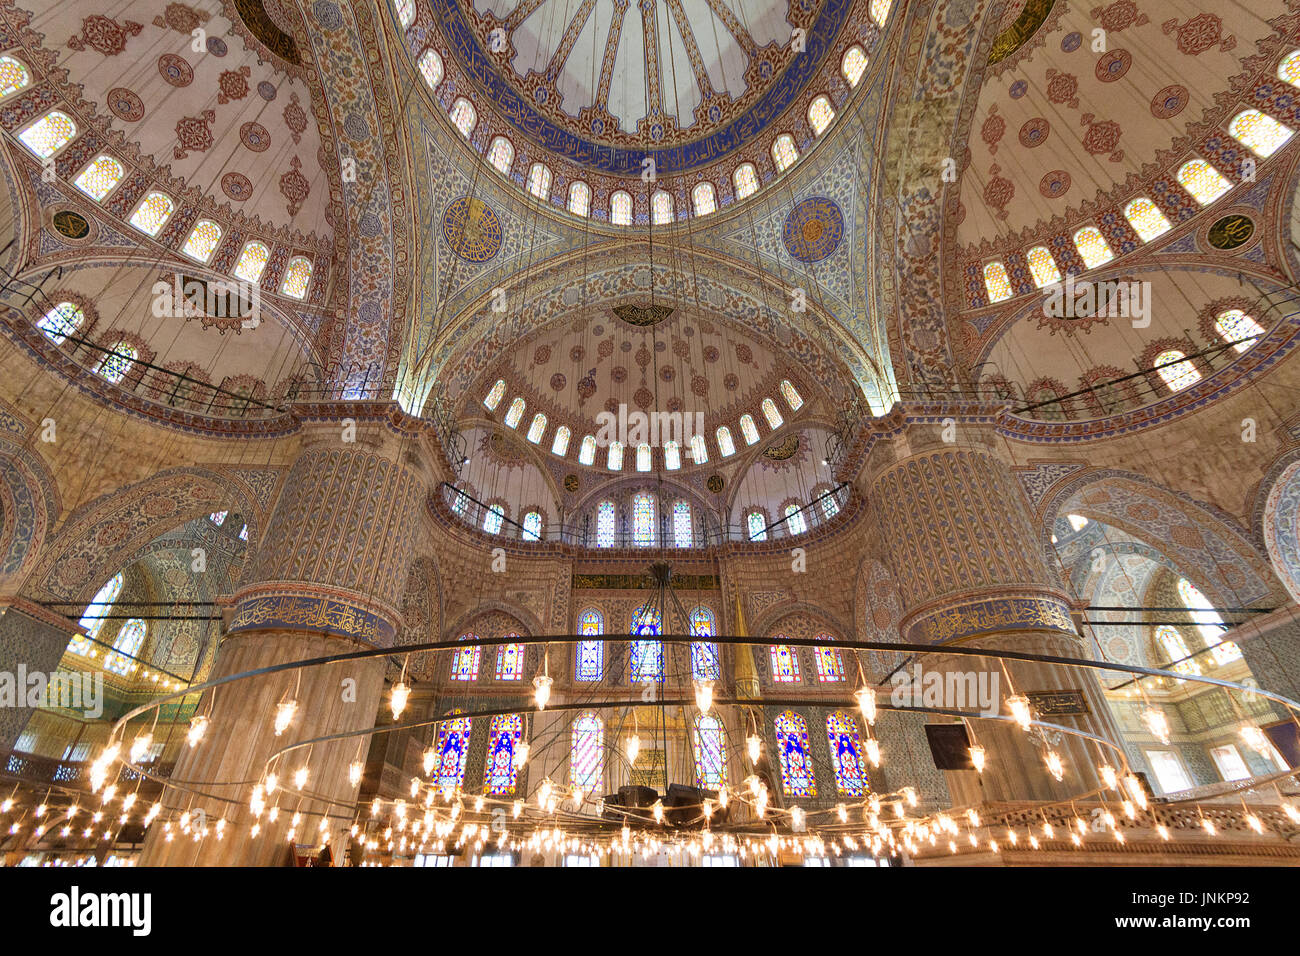 Inside of the Blue Mosque, Istanbul, Turkey. Stock Photo